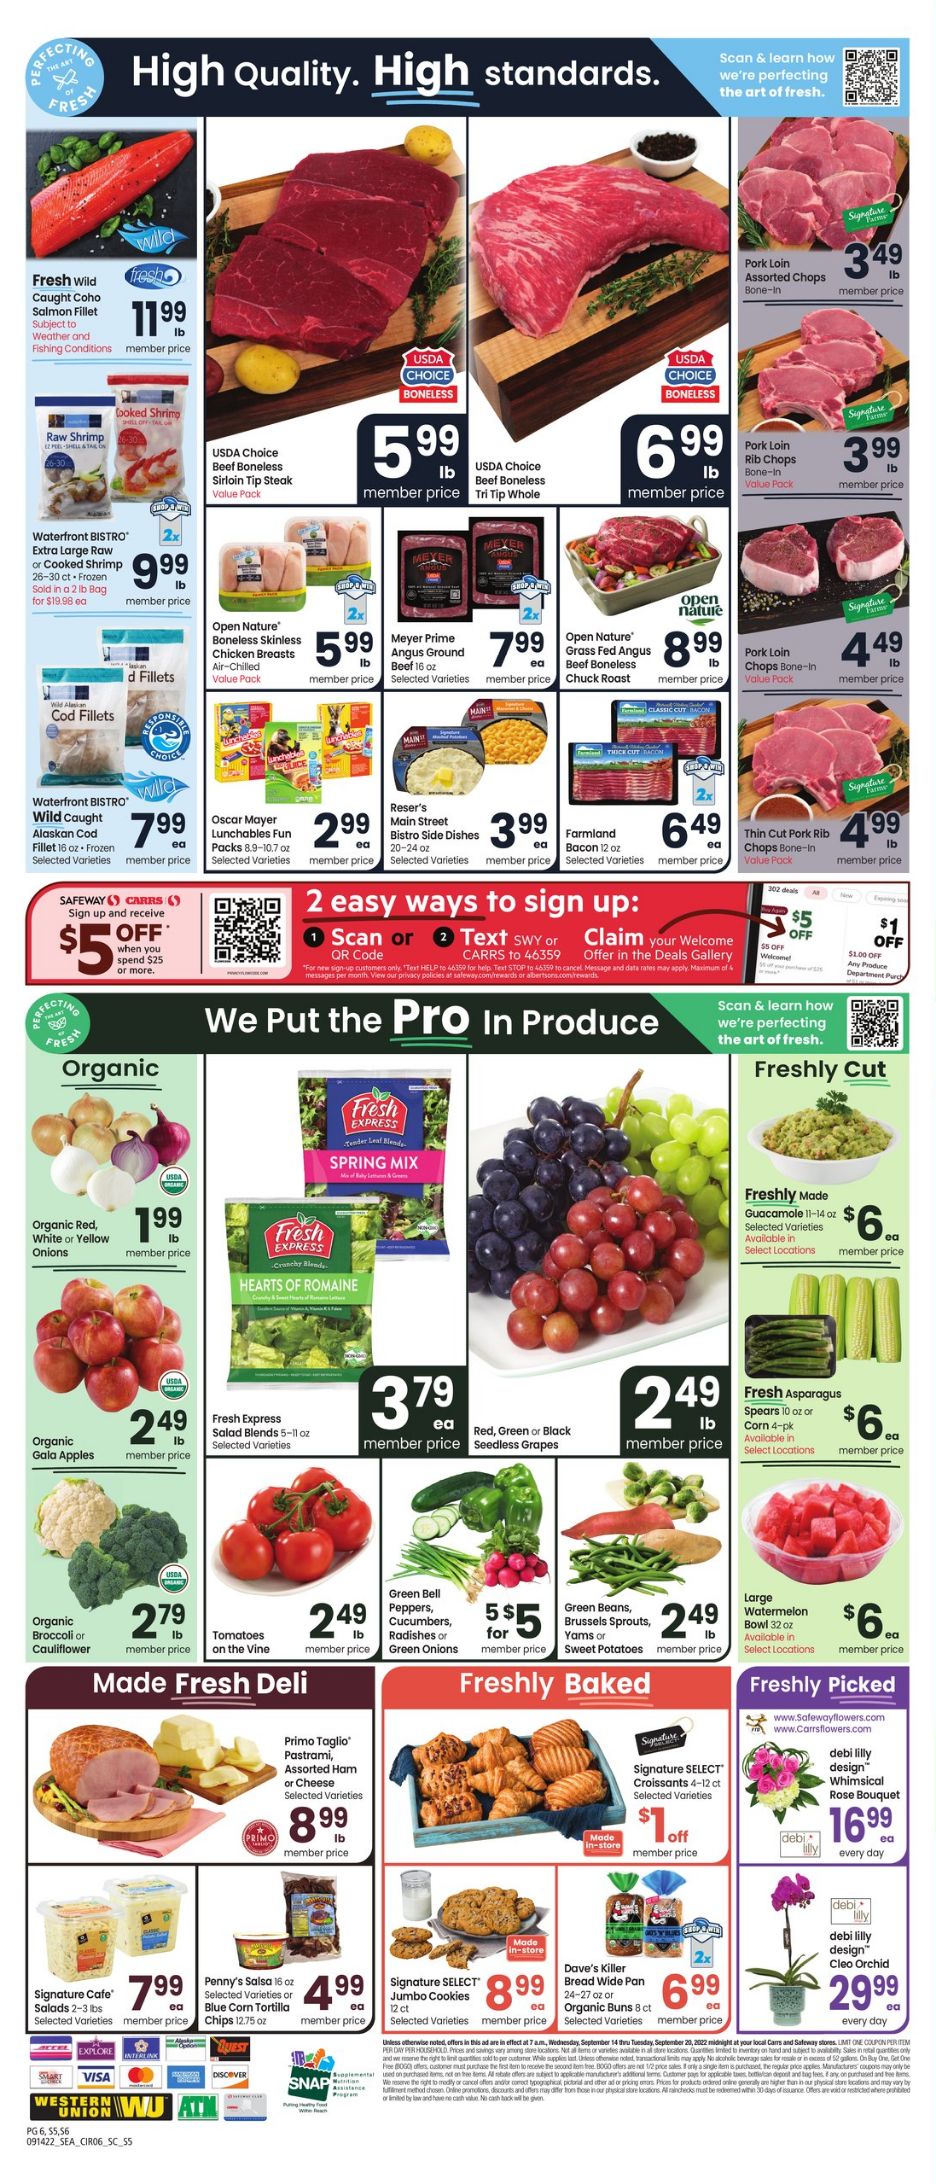 Weekly ad Carrs 09/14/2022 - 09/20/2022